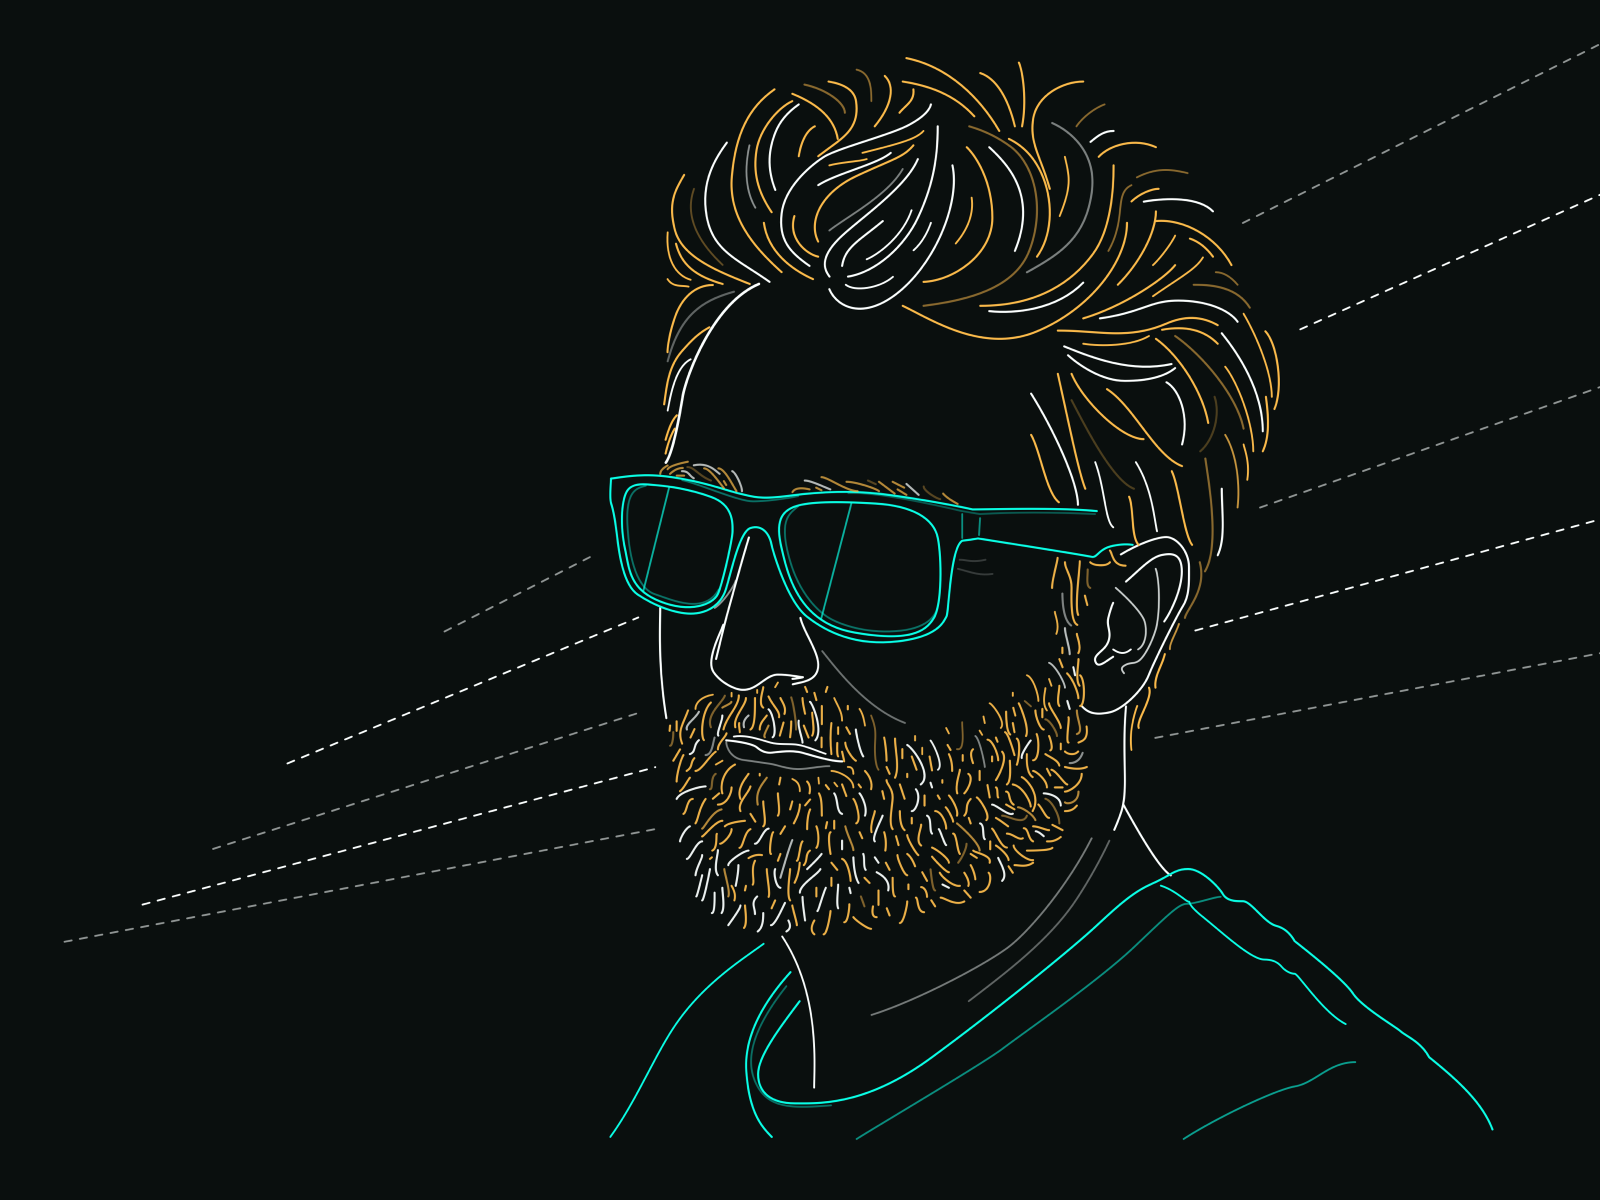 Profile pic for Spotify by Nenad Milosevic on Dribbble